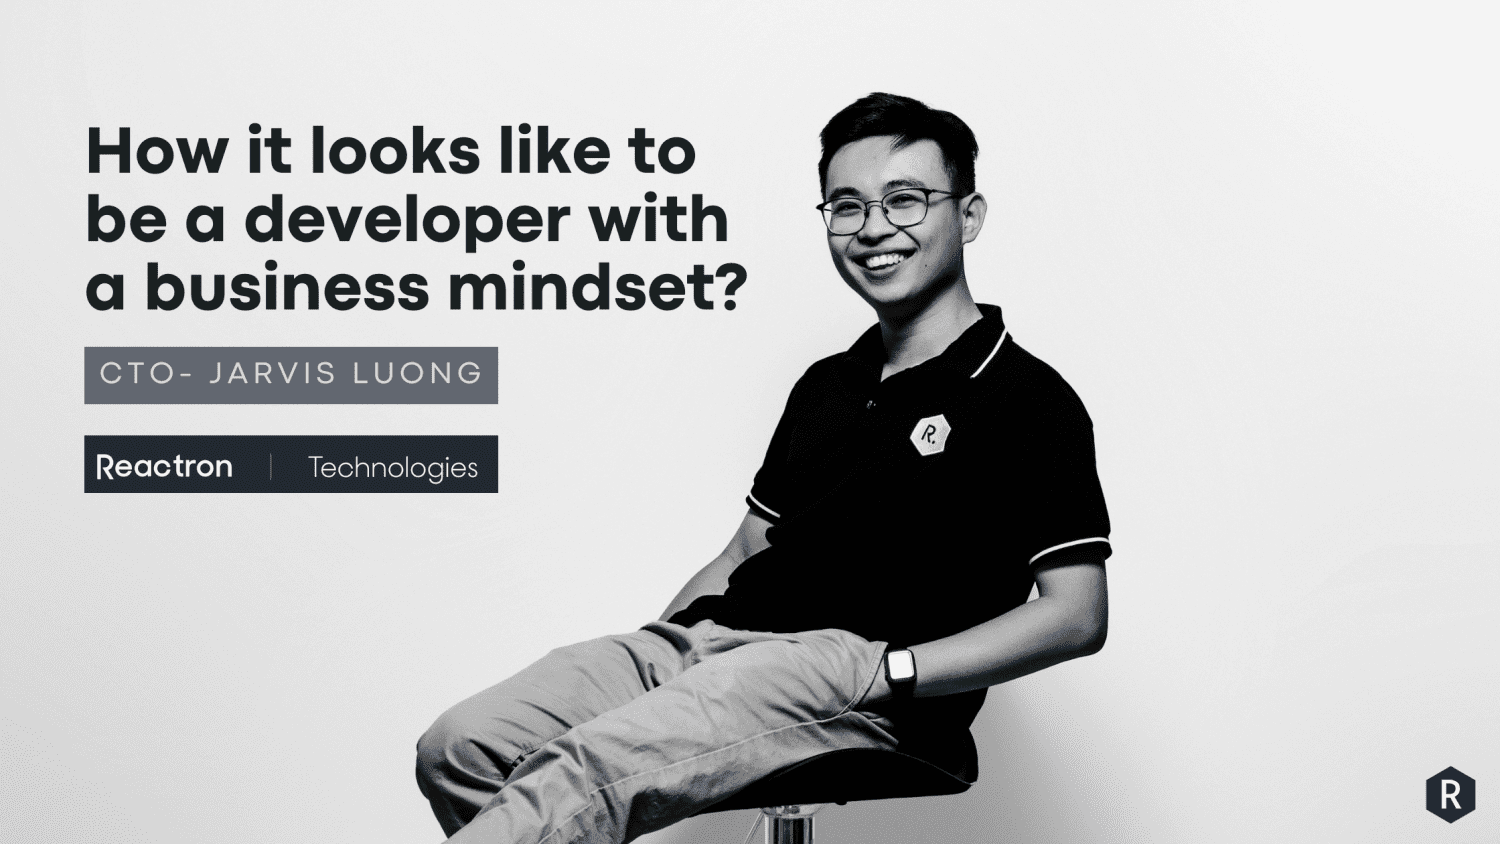 Jarvis Luong- CTO Reactron- How do it looks like to be a developer with business mindset